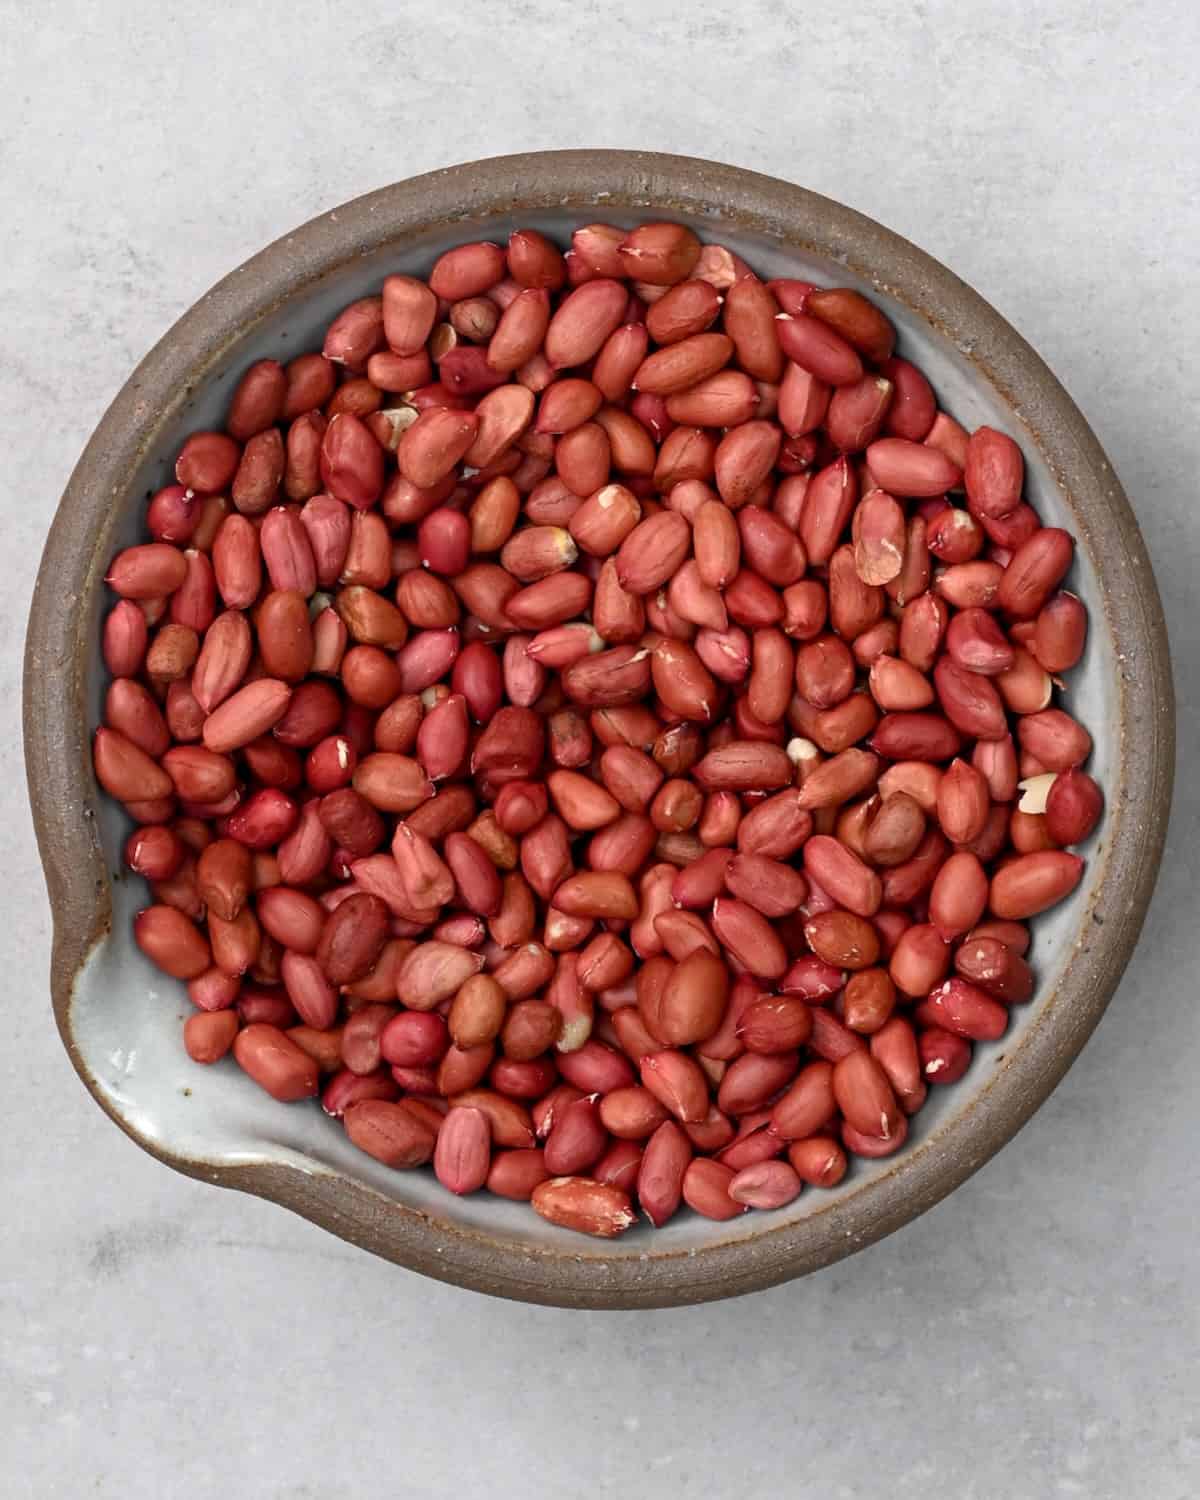 A bowl with raw peanuts